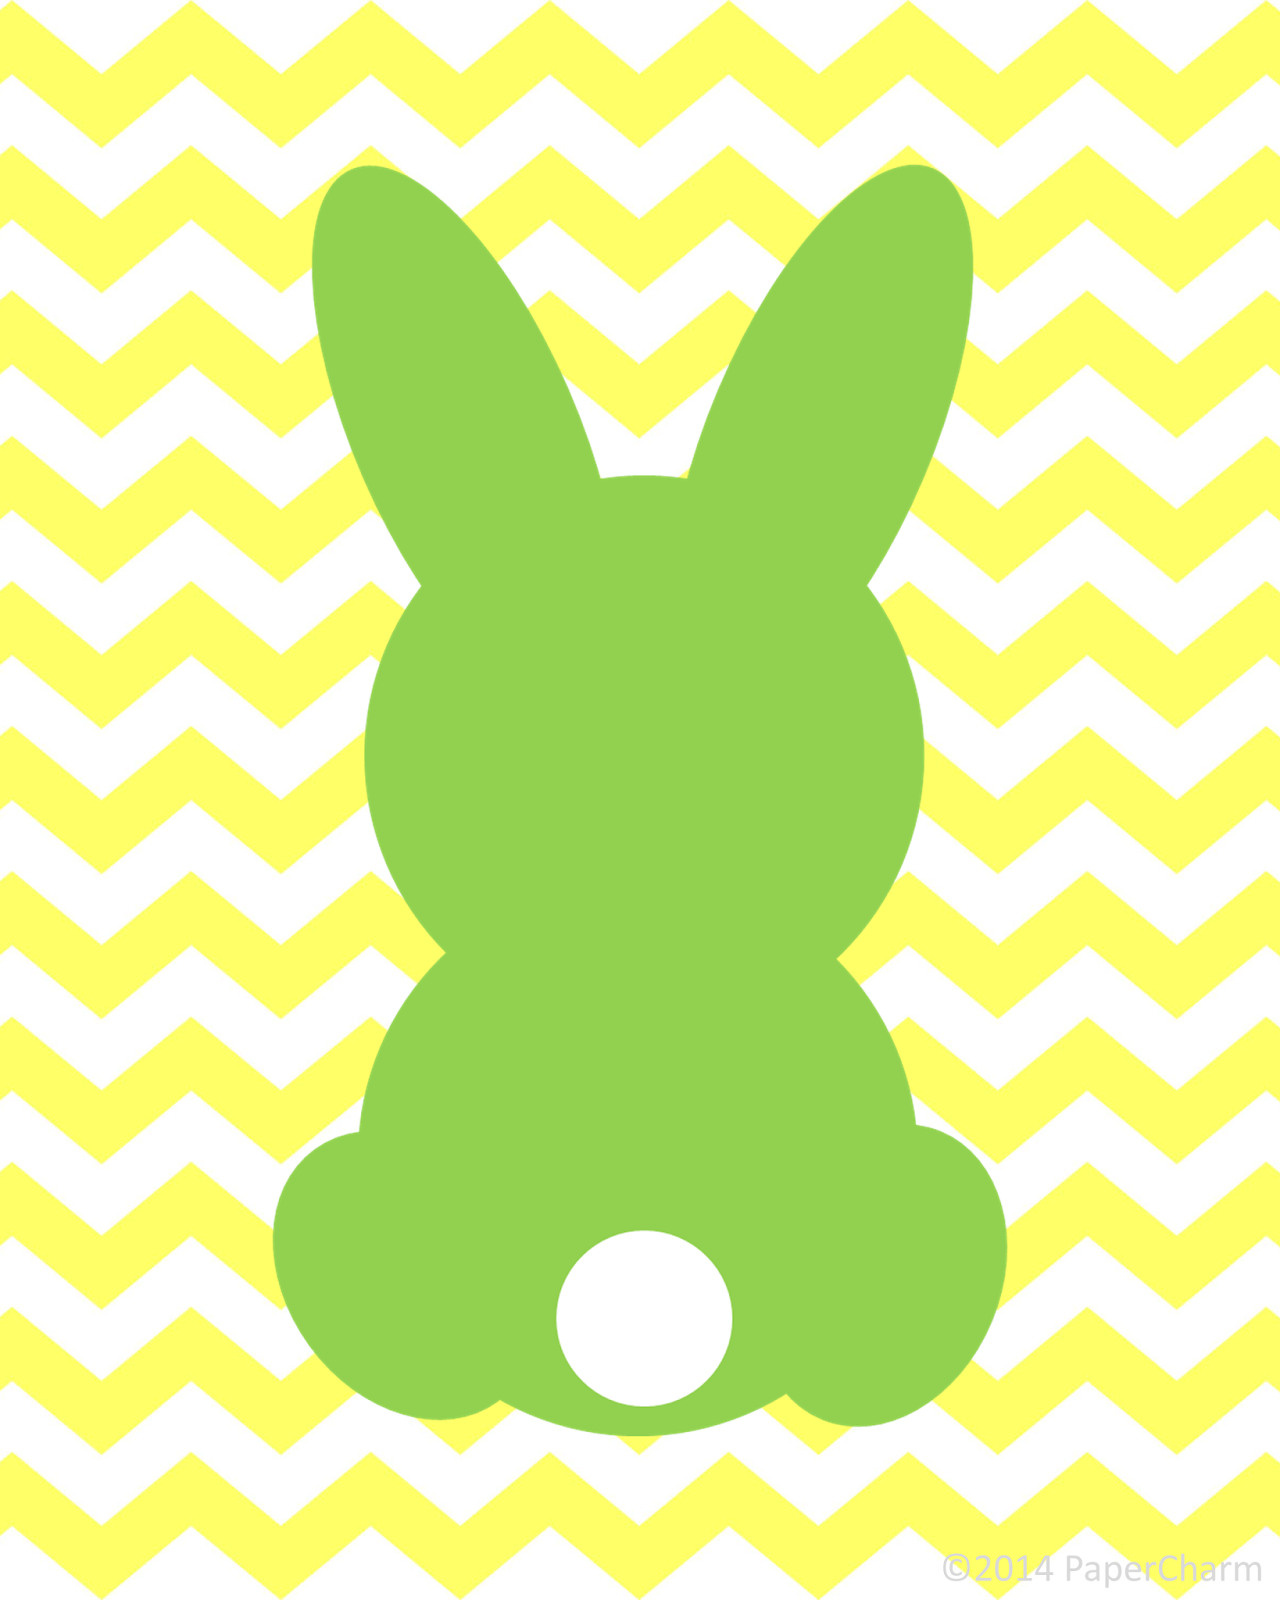 PaperCharm: Free Bunny Silhouette Easter Printable Art